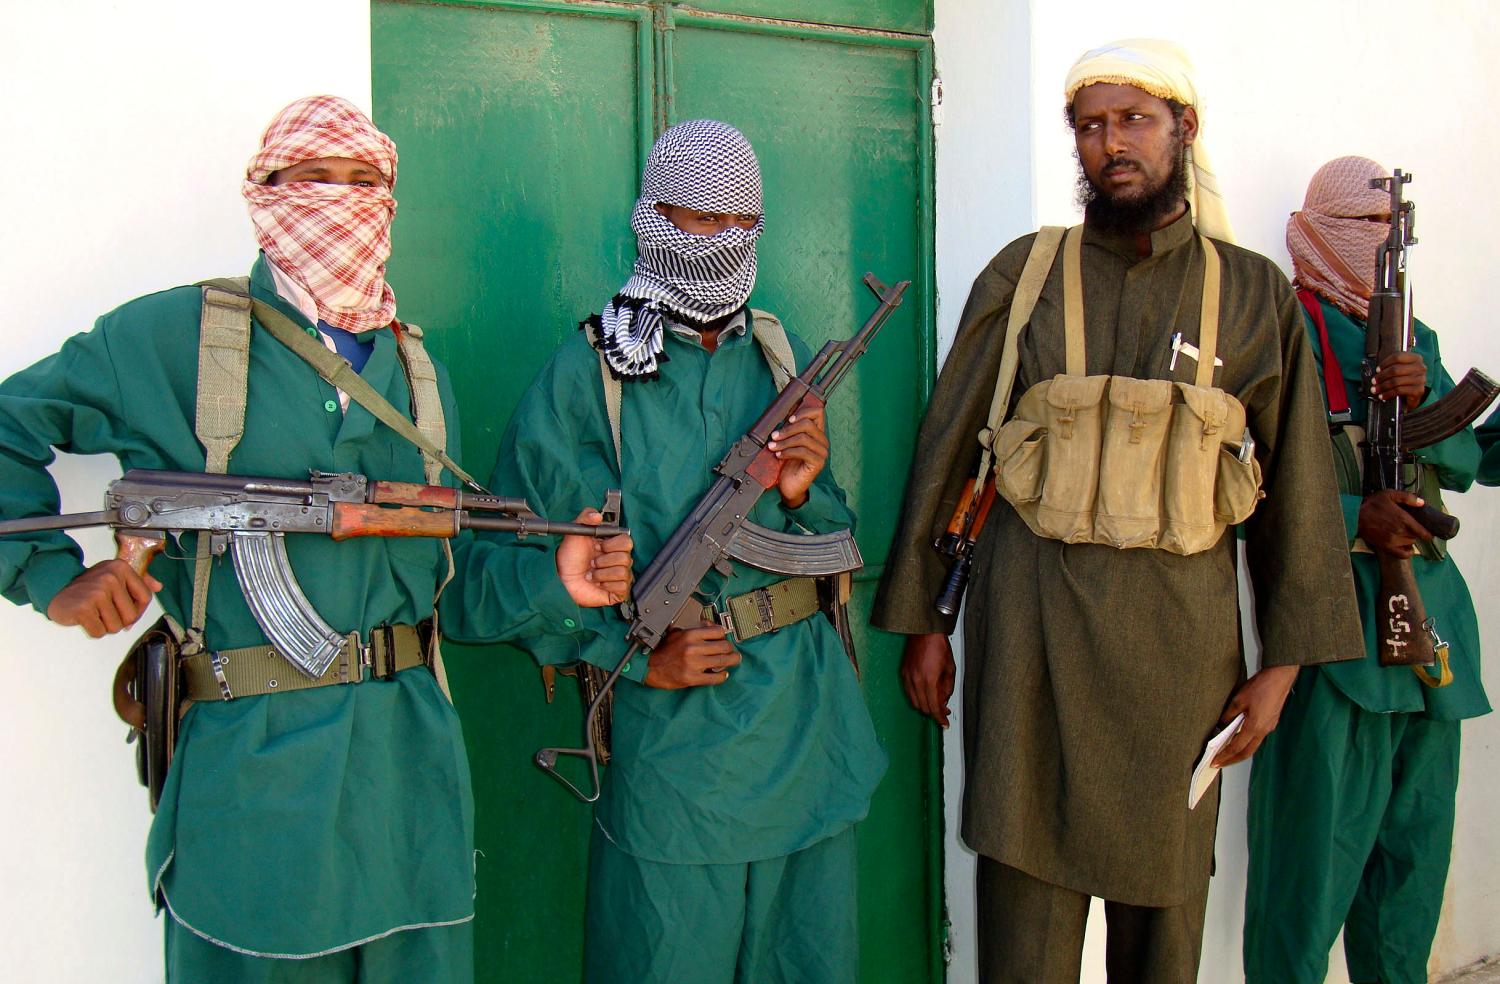 Sheik Muktar Robow Abu Mansur (2nd R), spokesman of Somalia's Islamic al-Shabab, leaves a news conference after vowing to step up attacks against government soldiers and foreign troops in Mogadishu December 14, 2008.  Somalia's President Abdullahi Yusuf sacked his prime minister on Sunday after they disagreed on a new cabinet demanded by donors, throwing his Western-backed interim government into disarray. Hassan Hussein Nur Adde was the second premier fired by Yusuf and had been in the job for only about a year. The fragile administration is fighting Islamist rebels who control the south and are camped on the outskirts of the capital Mogadishu.  REUTERS/Feisal Omar (SOMALIA)